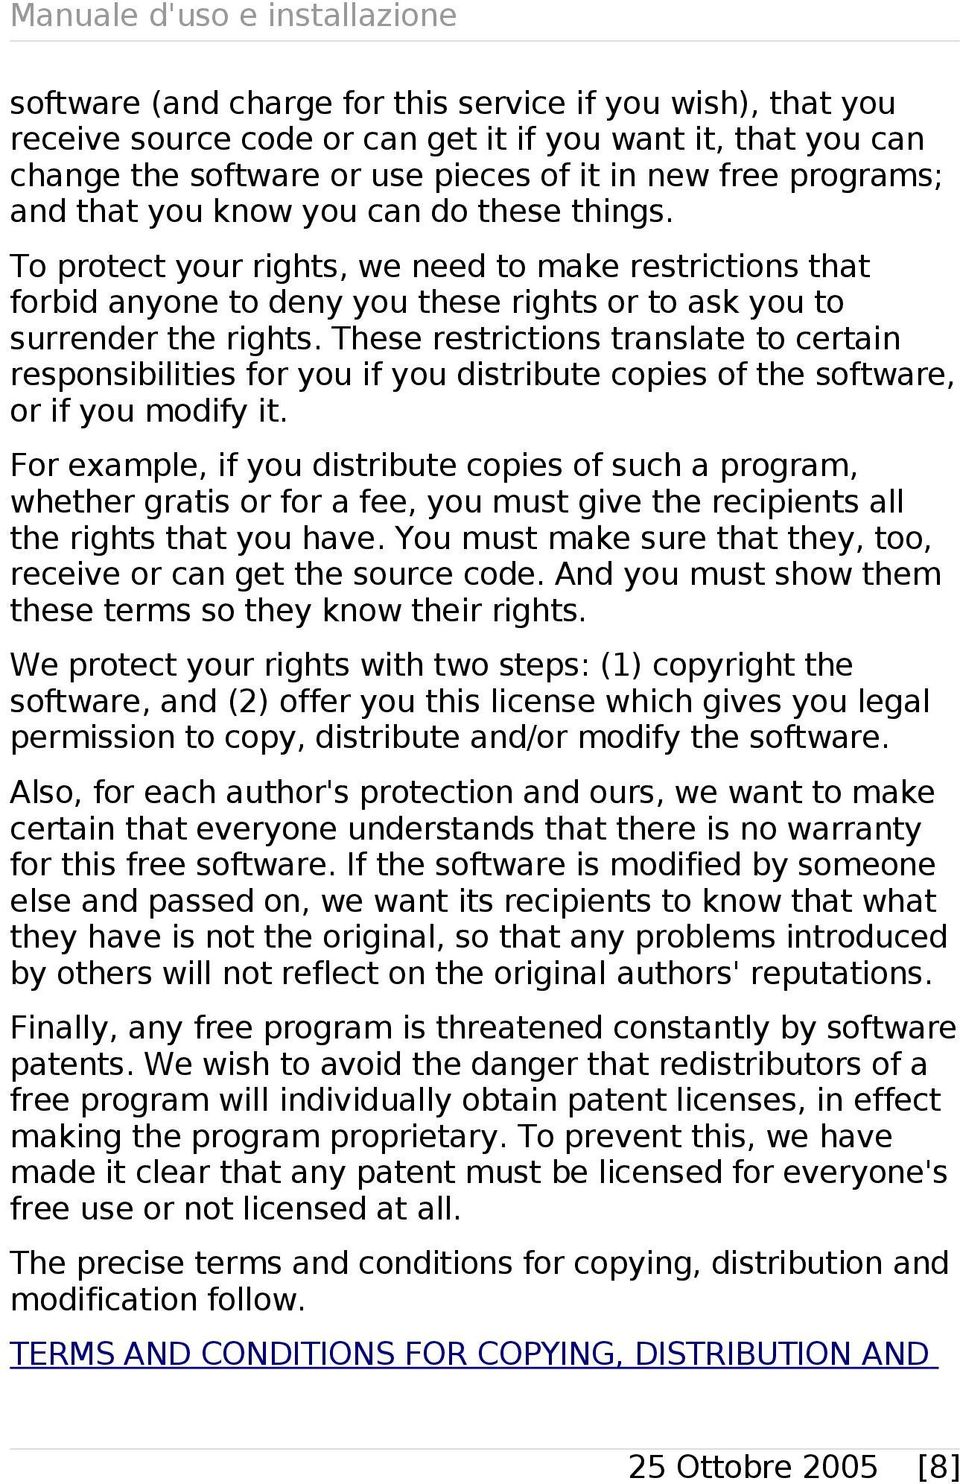 These restrictions translate to certain responsibilities for you if you distribute copies of the software, or if you modify it.